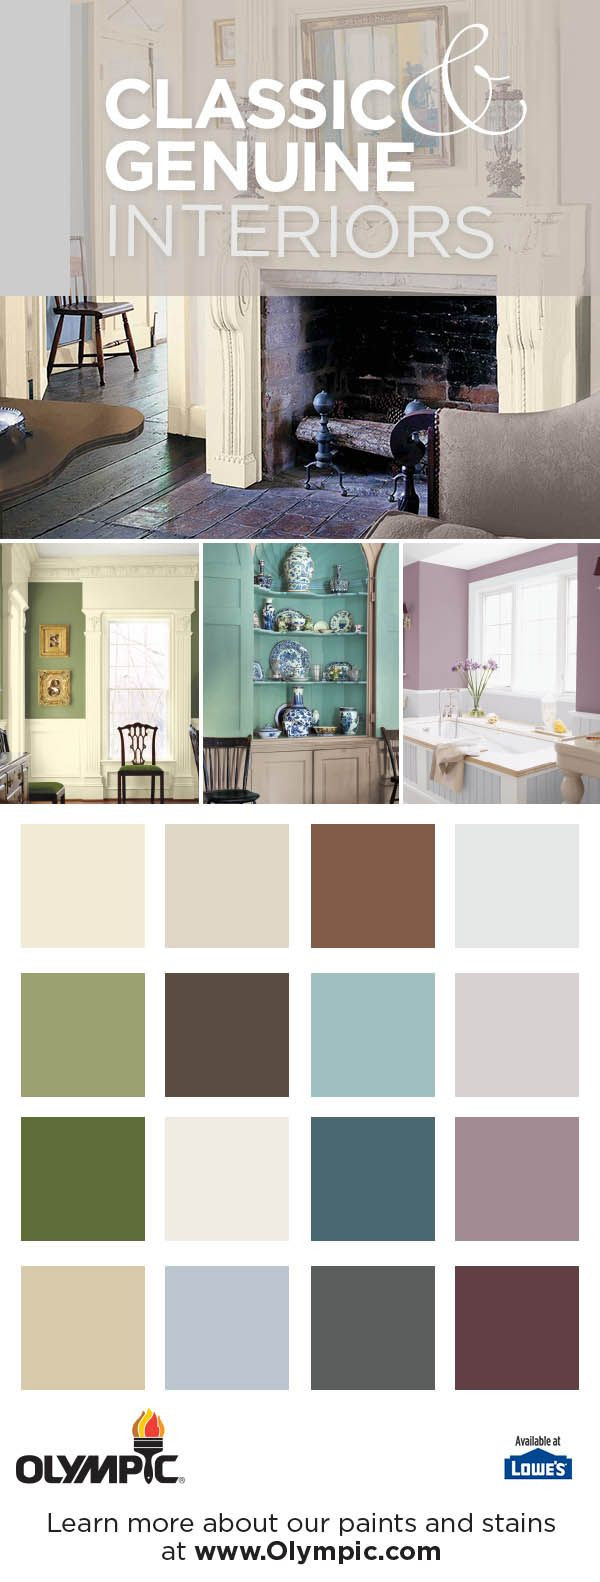 Best ideas about Olympic Paint Colors
. Save or Pin 20 best Classic & Genuine Paint Colors images on Pinterest Now.